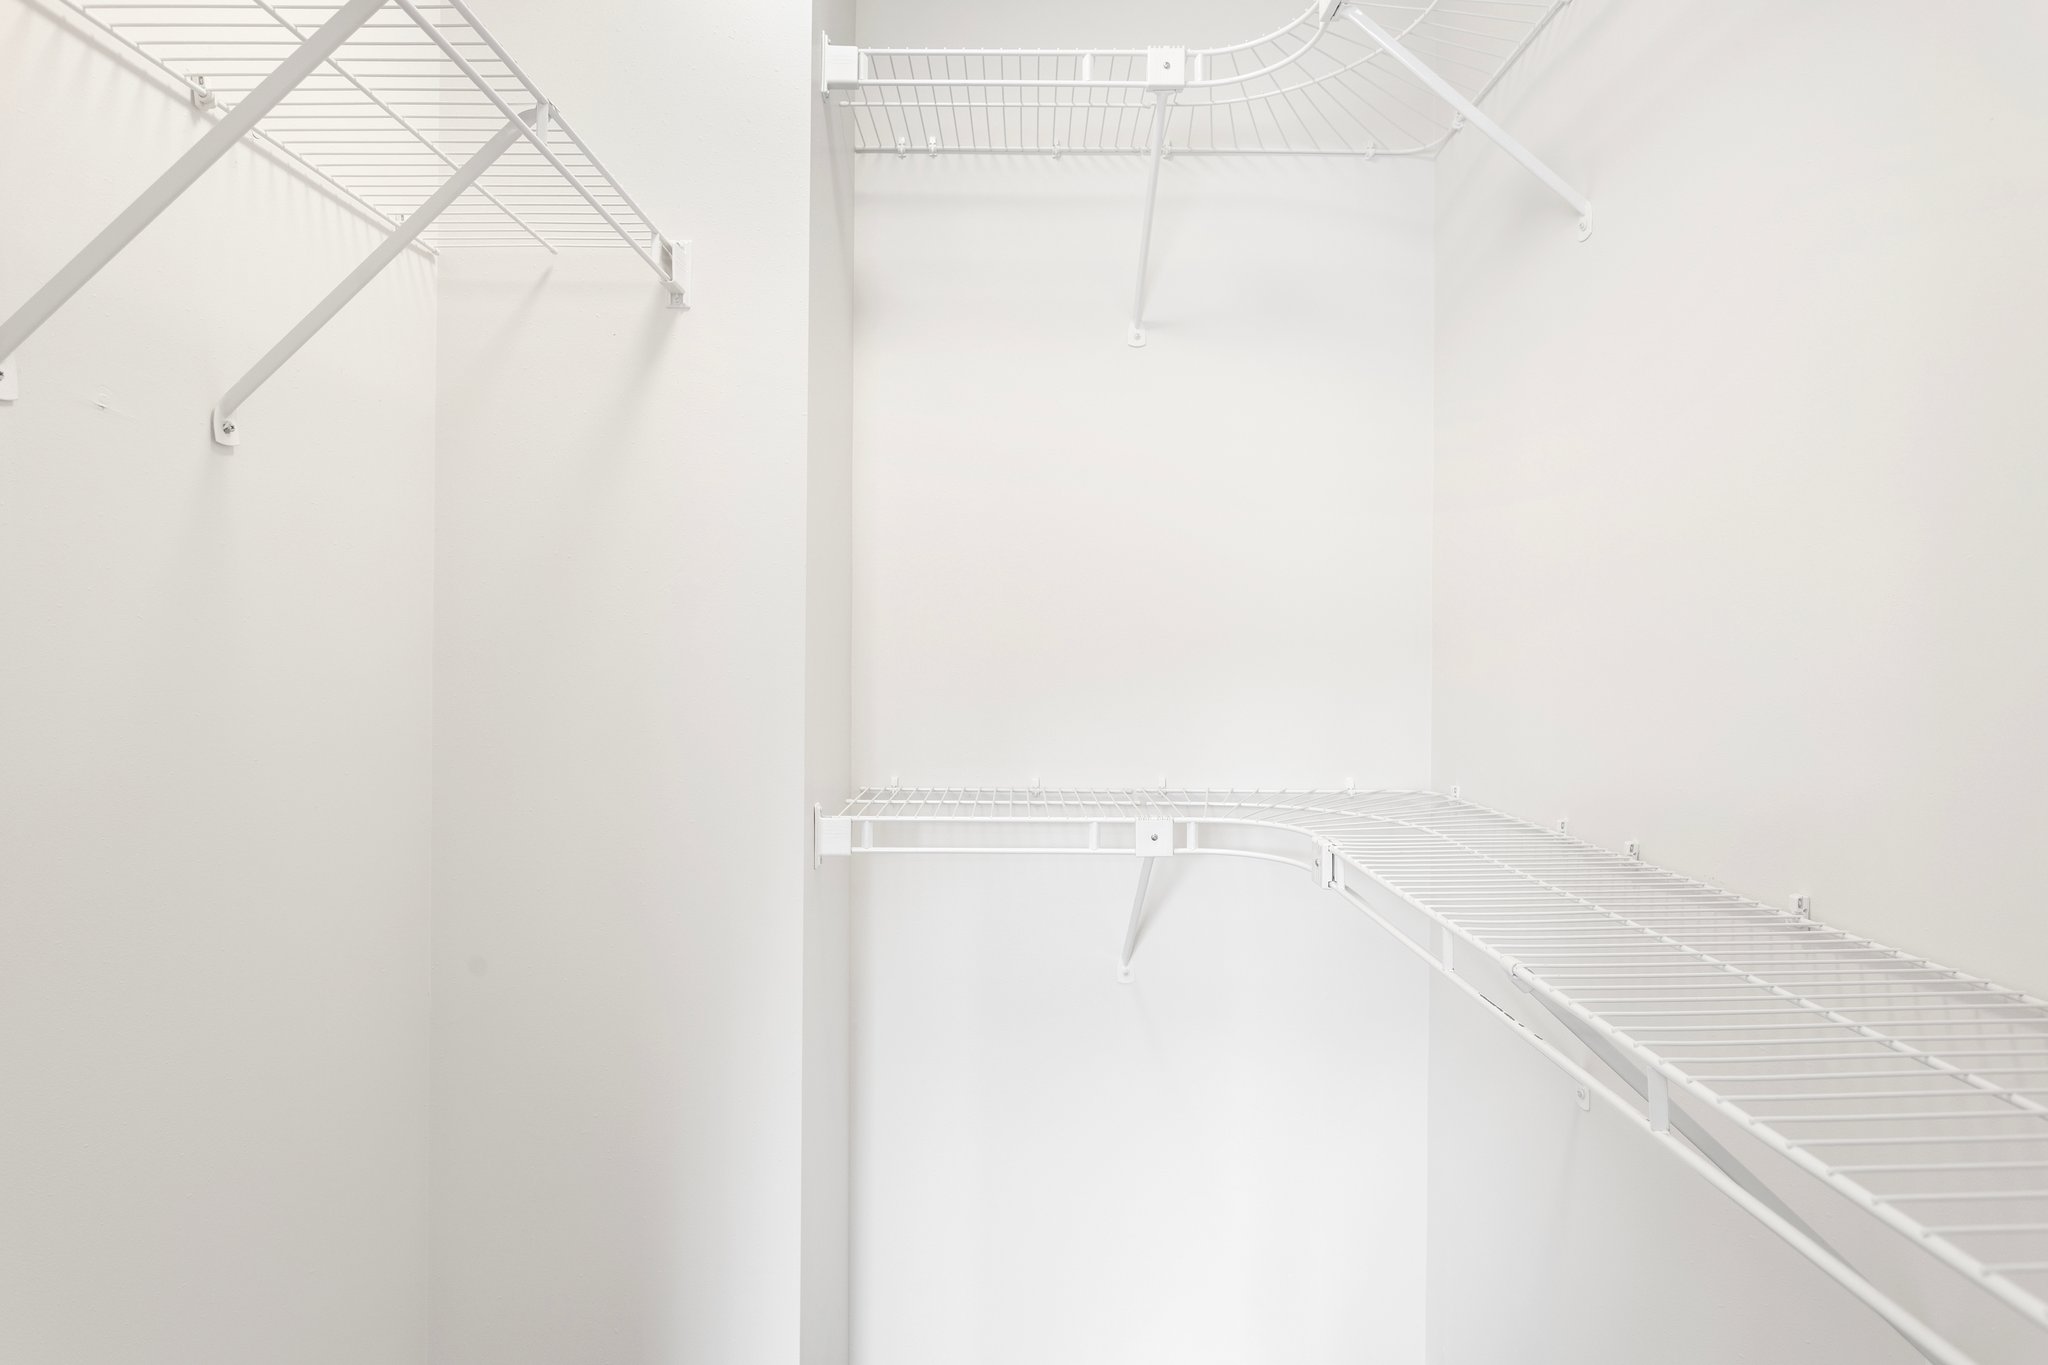 The large walk-in closet in the primary suite is a dream come true for anyone who loves fashion and organization. It has plenty of shelves and hanging rods to store and display your clothes and accessories.